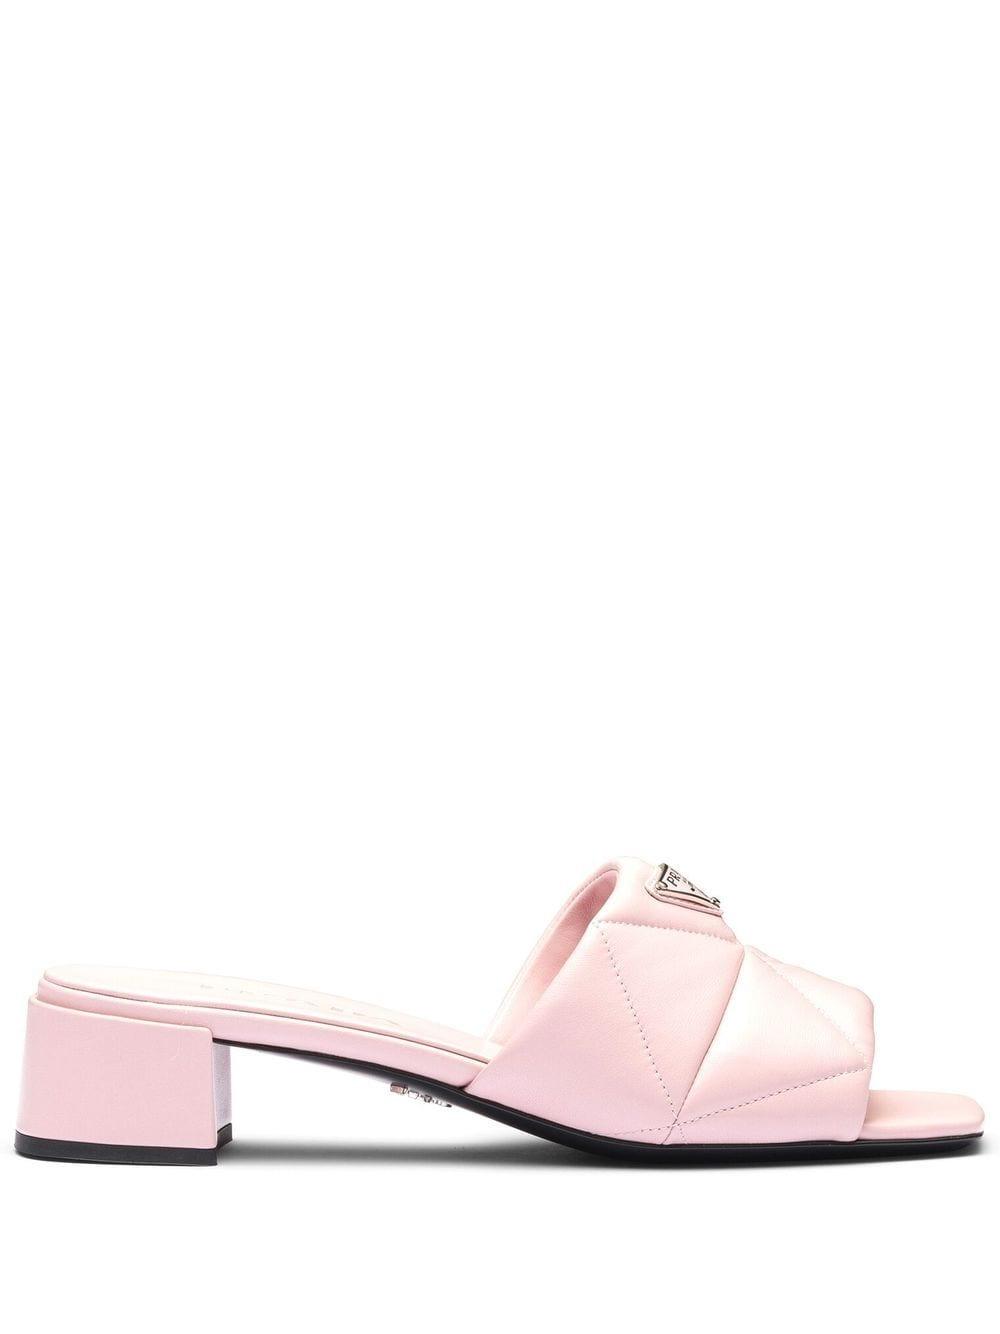 Prada Quilted Leather Slides in Pink | Lyst